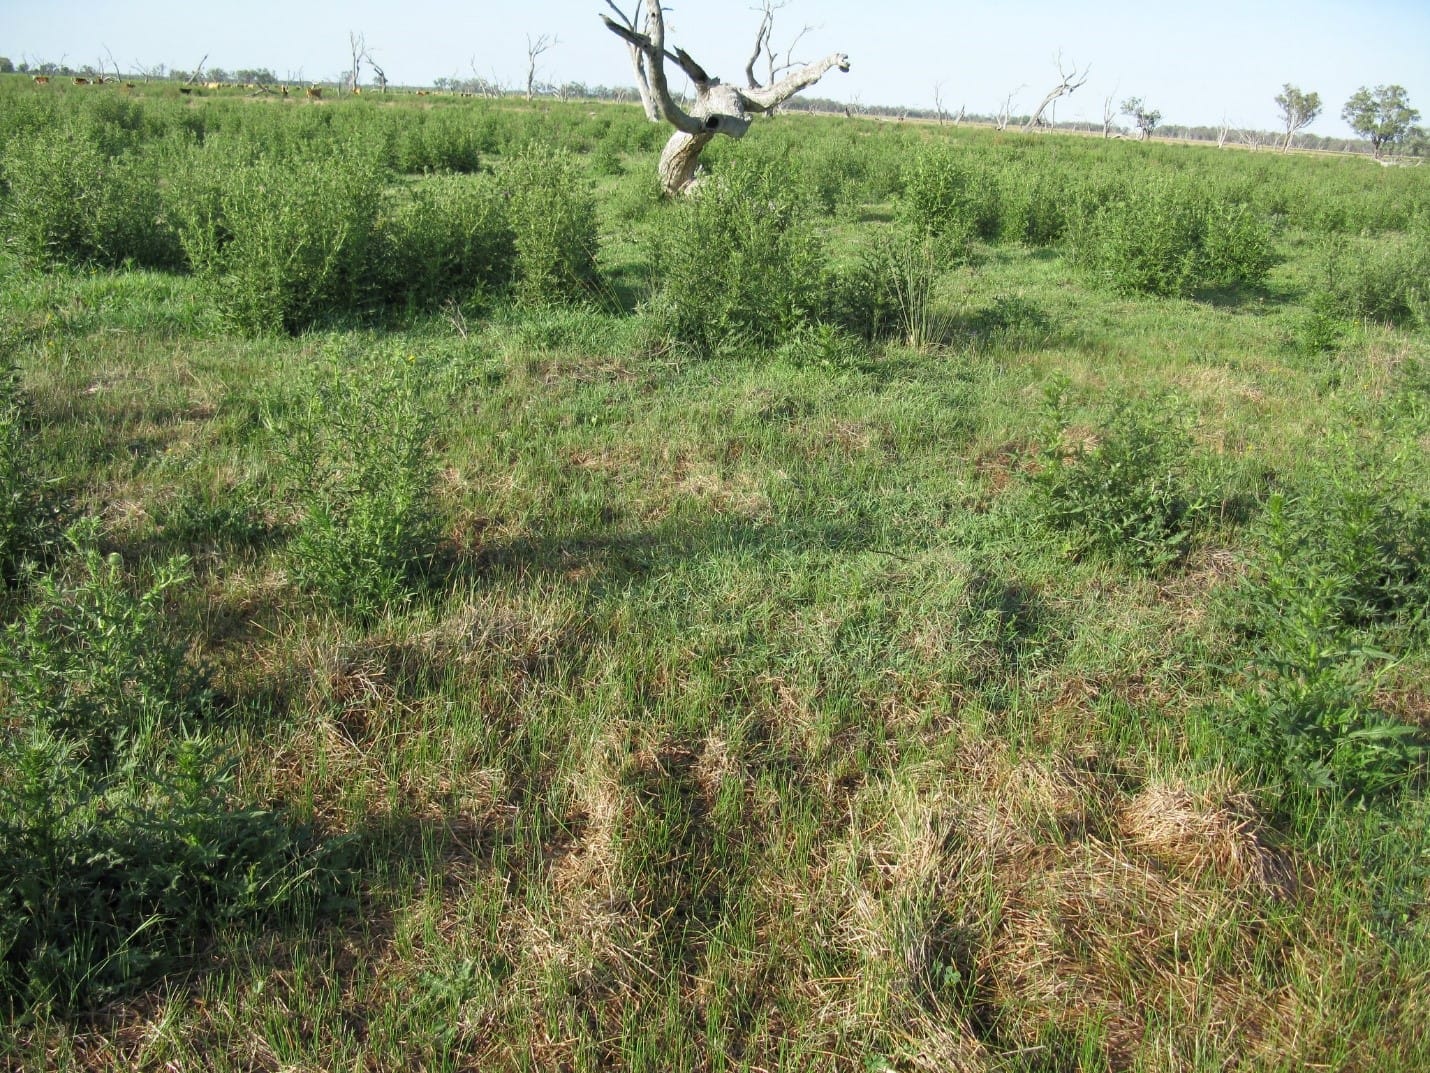 Bare patches like this in your pasture can cause soil erosion. And in turn reduces fertility and yield.